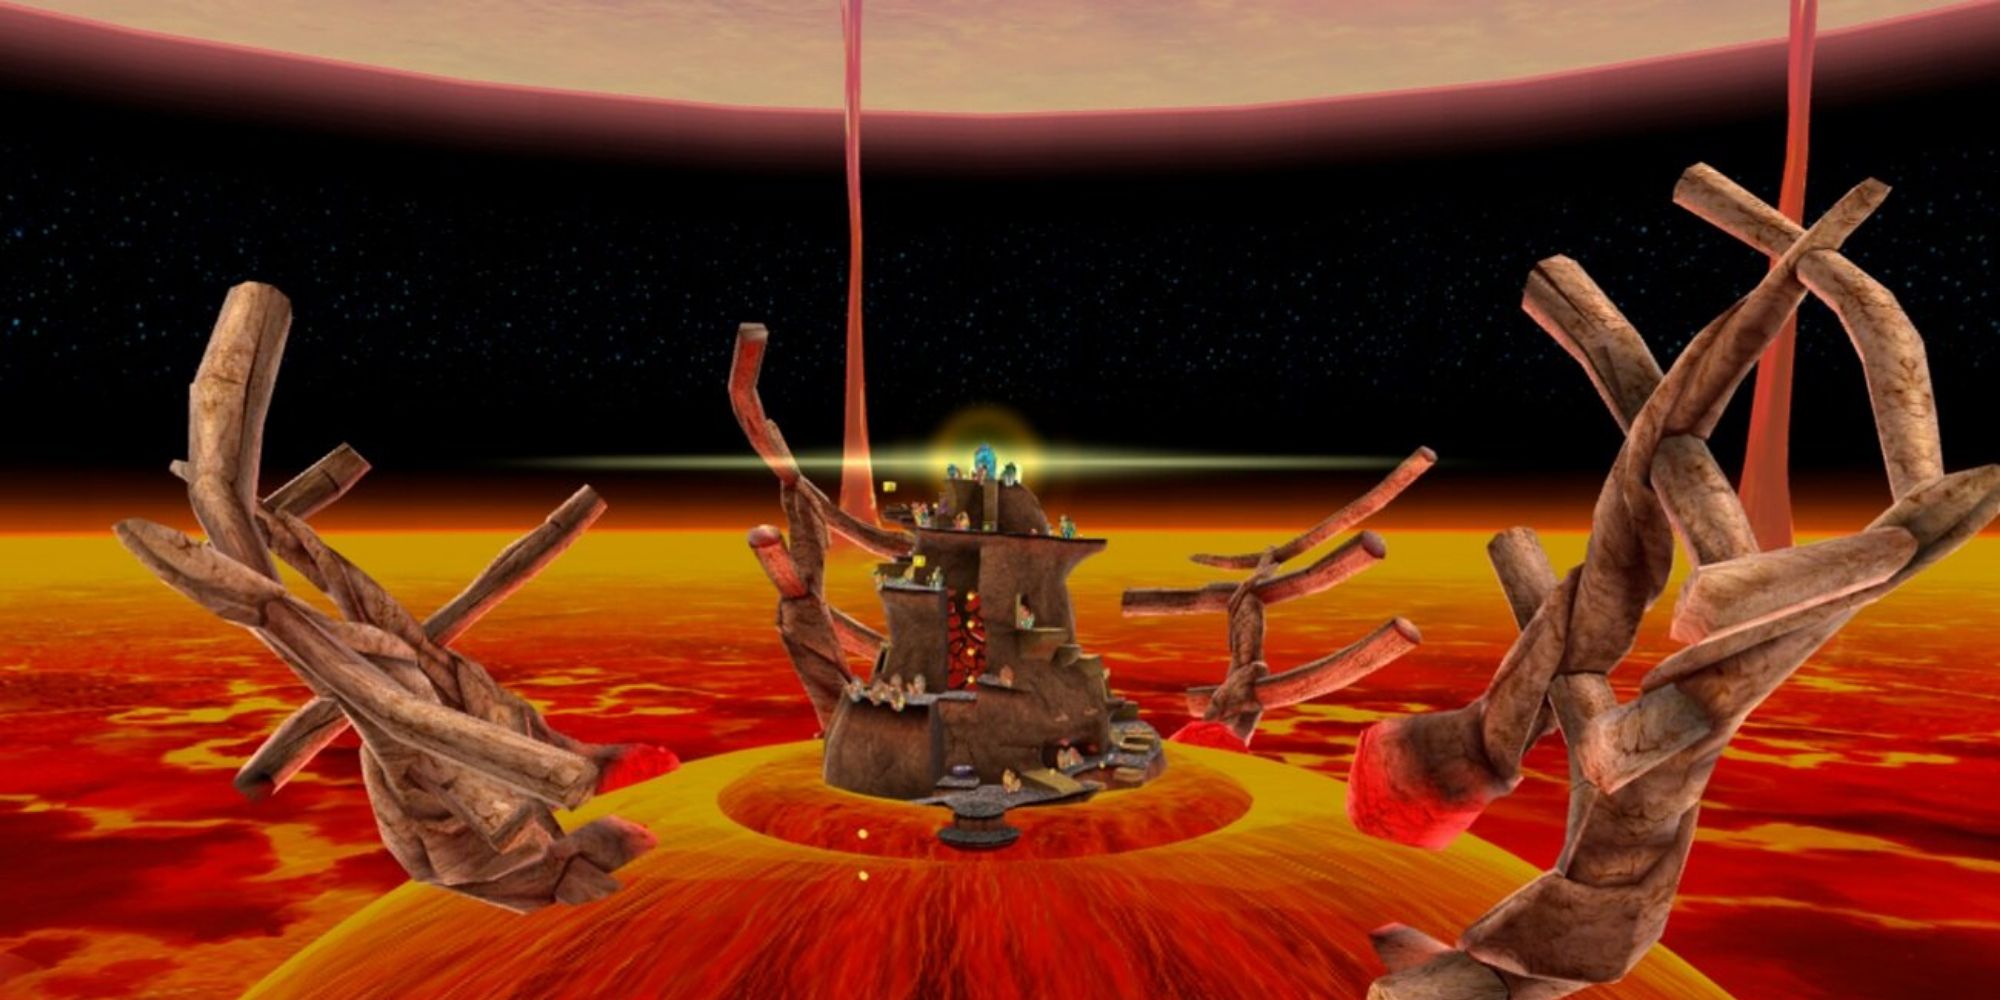 A screencap of a spindly rock tower balanced on a pool of lava in Super Mario Galaxy's Melty Molten Galaxy